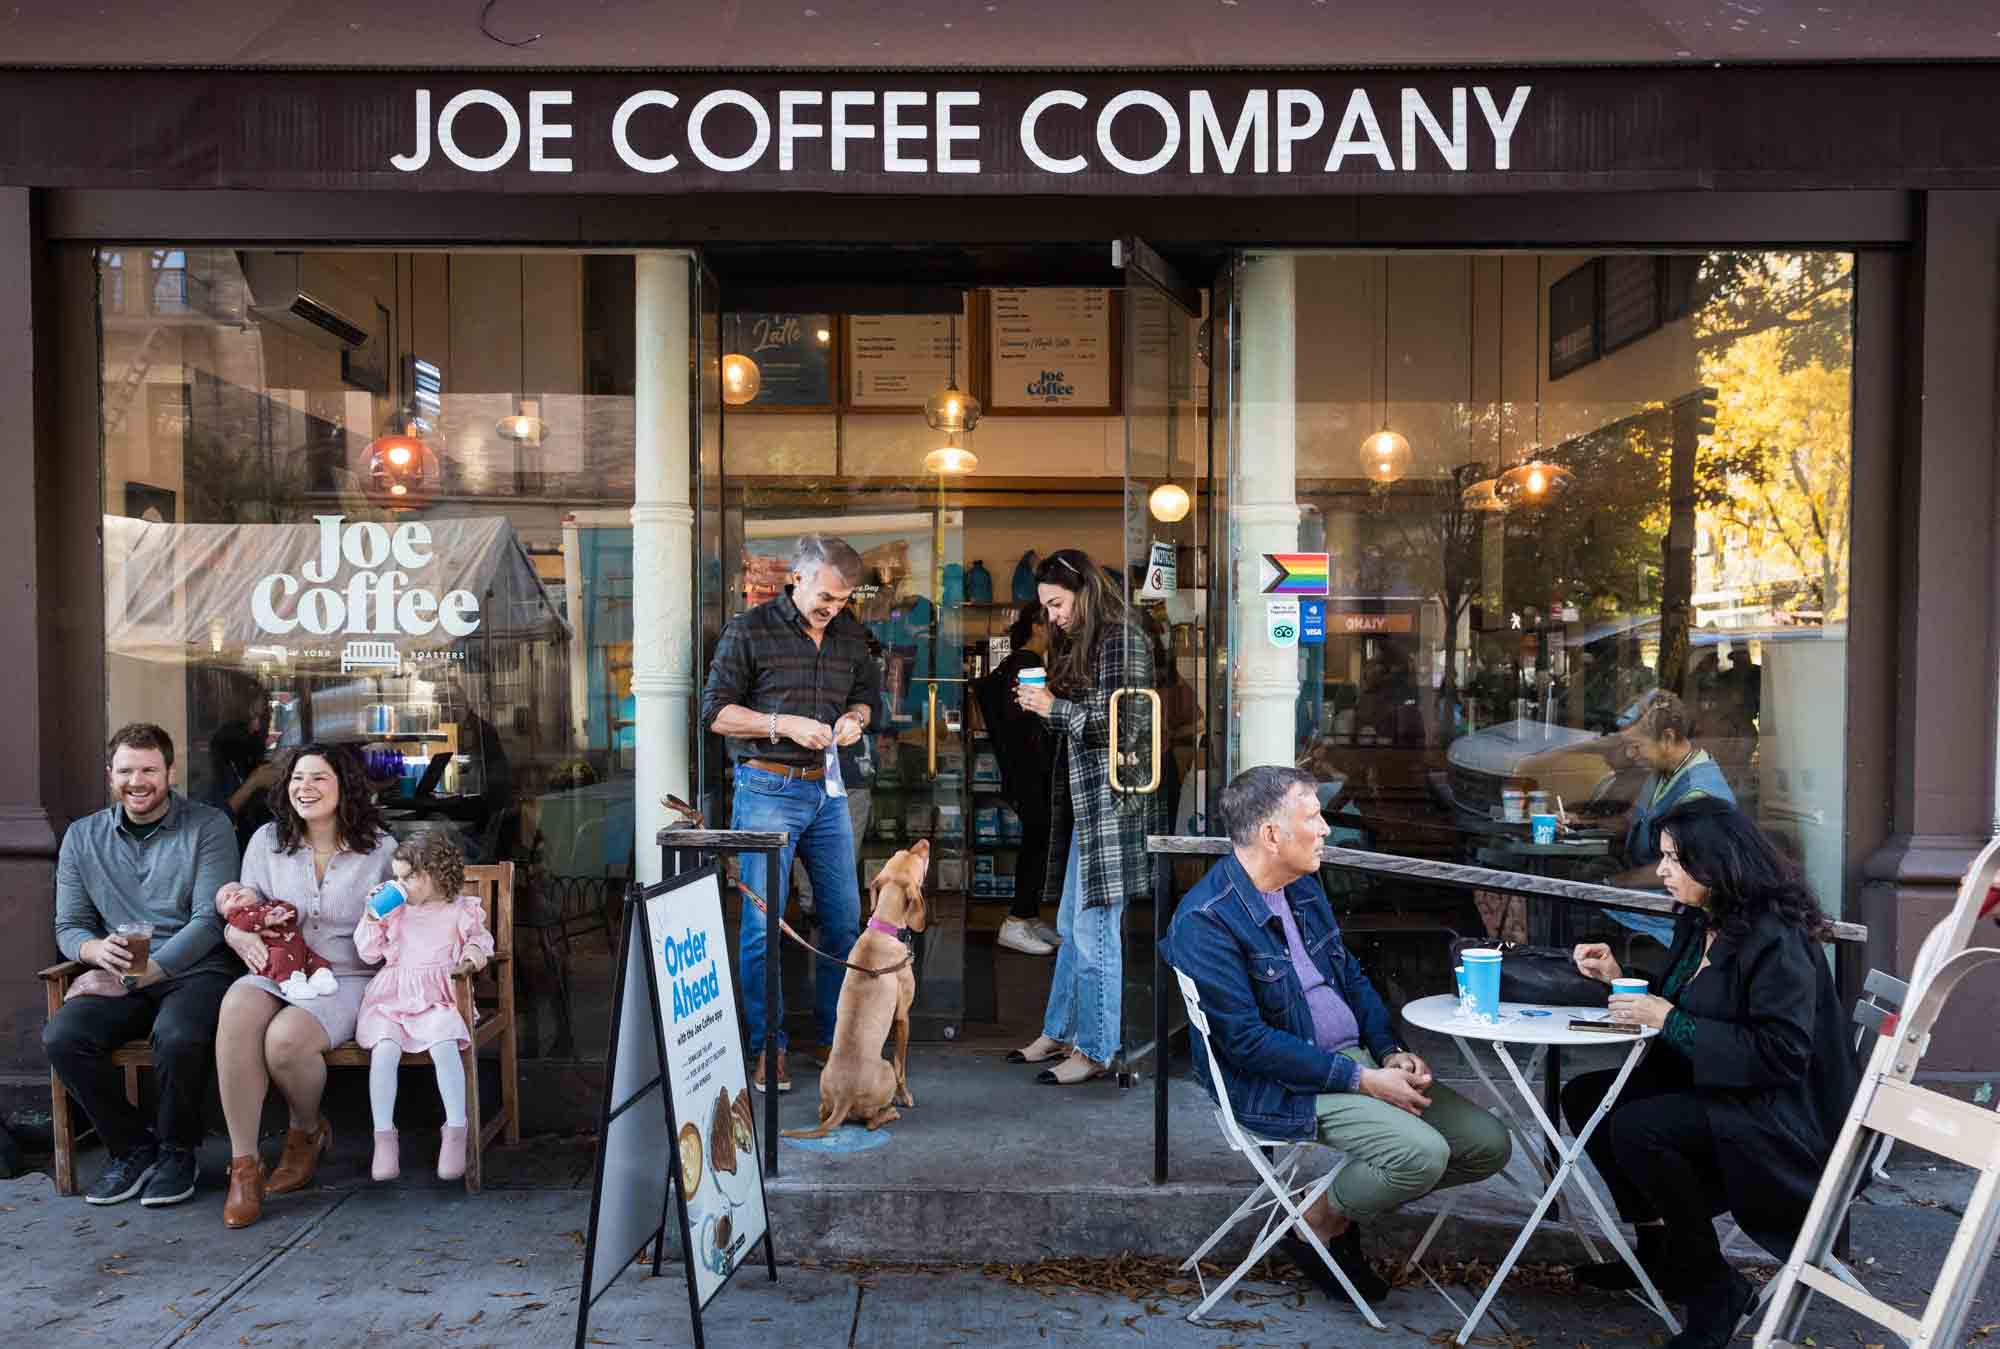 Sidewalk scene of three different families and coup[les in front of Joe Coffee Company in NYC